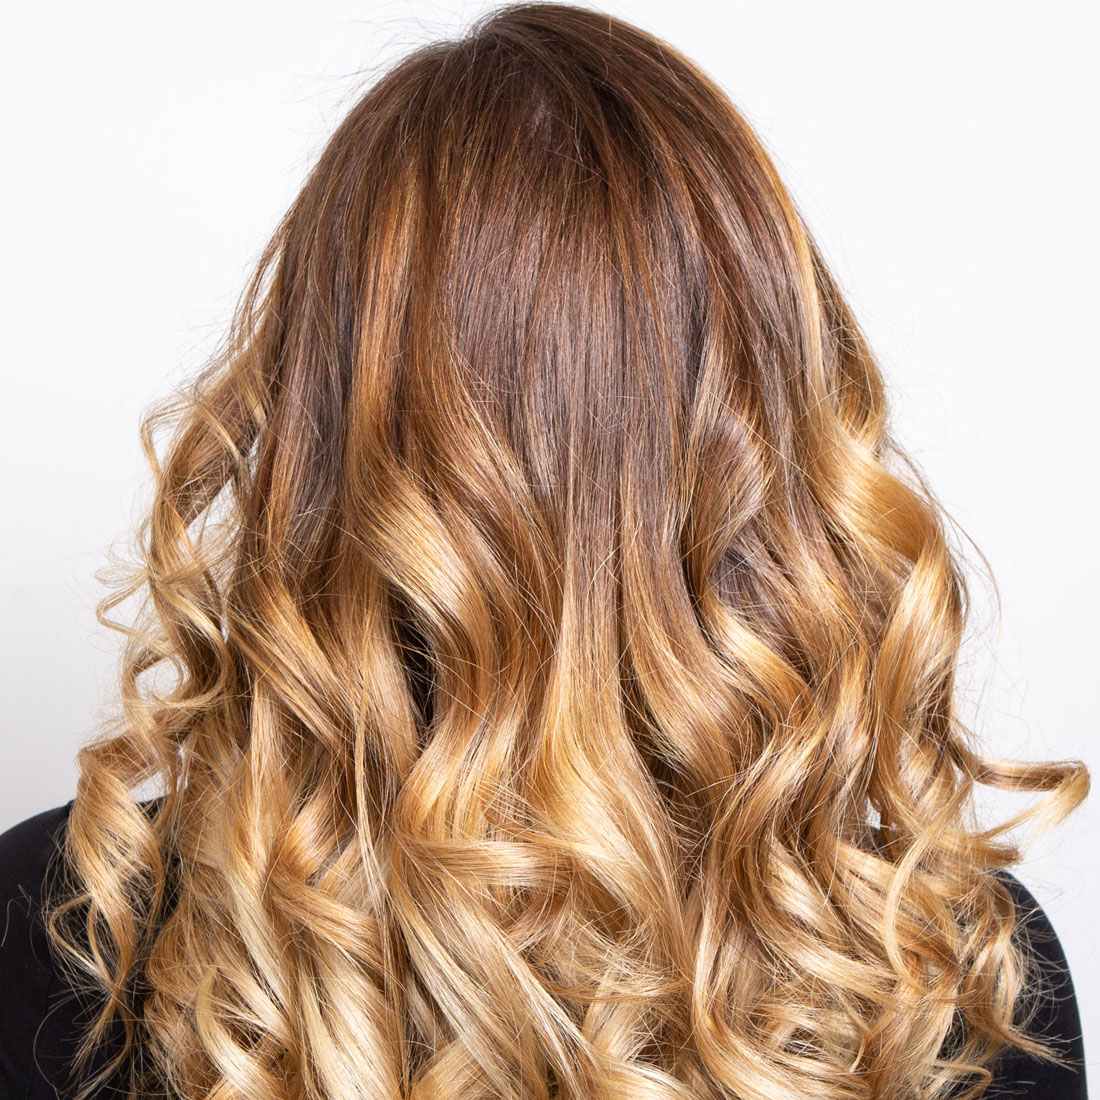 Blond Haired with Balayage